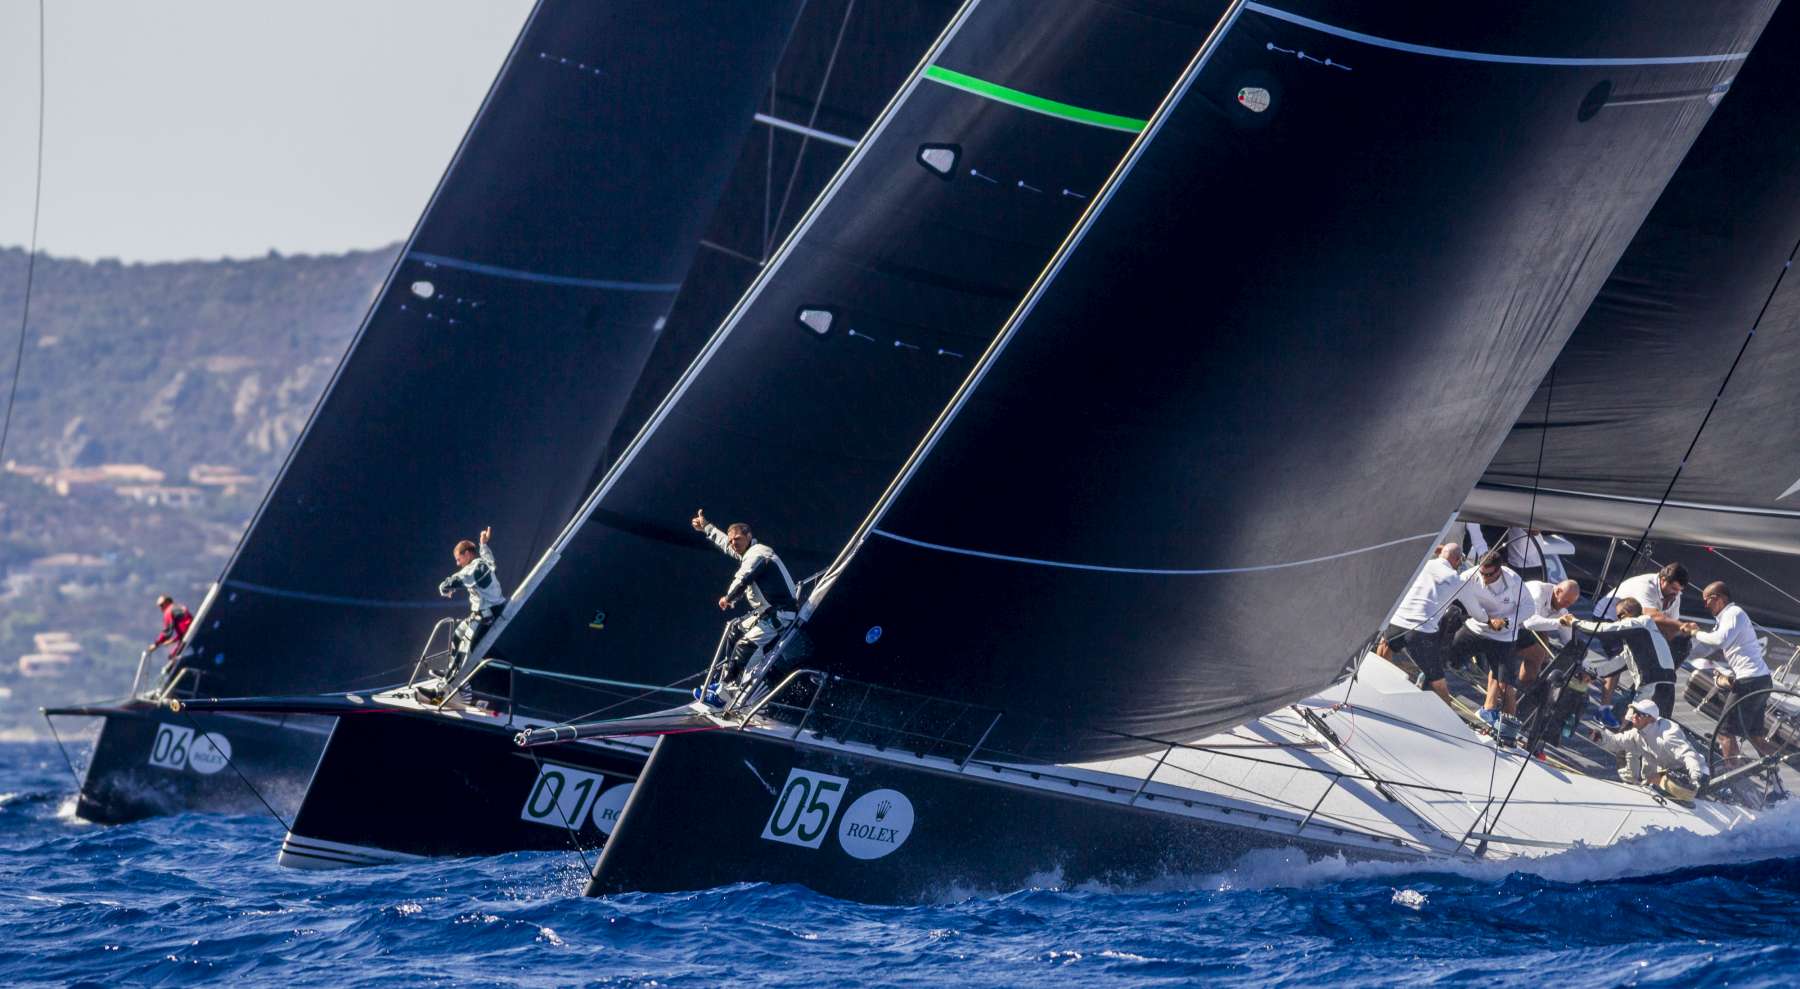 Maxi Yacht Rolex Cup Preview Video - NEWS - Yacht Club Costa Smeralda